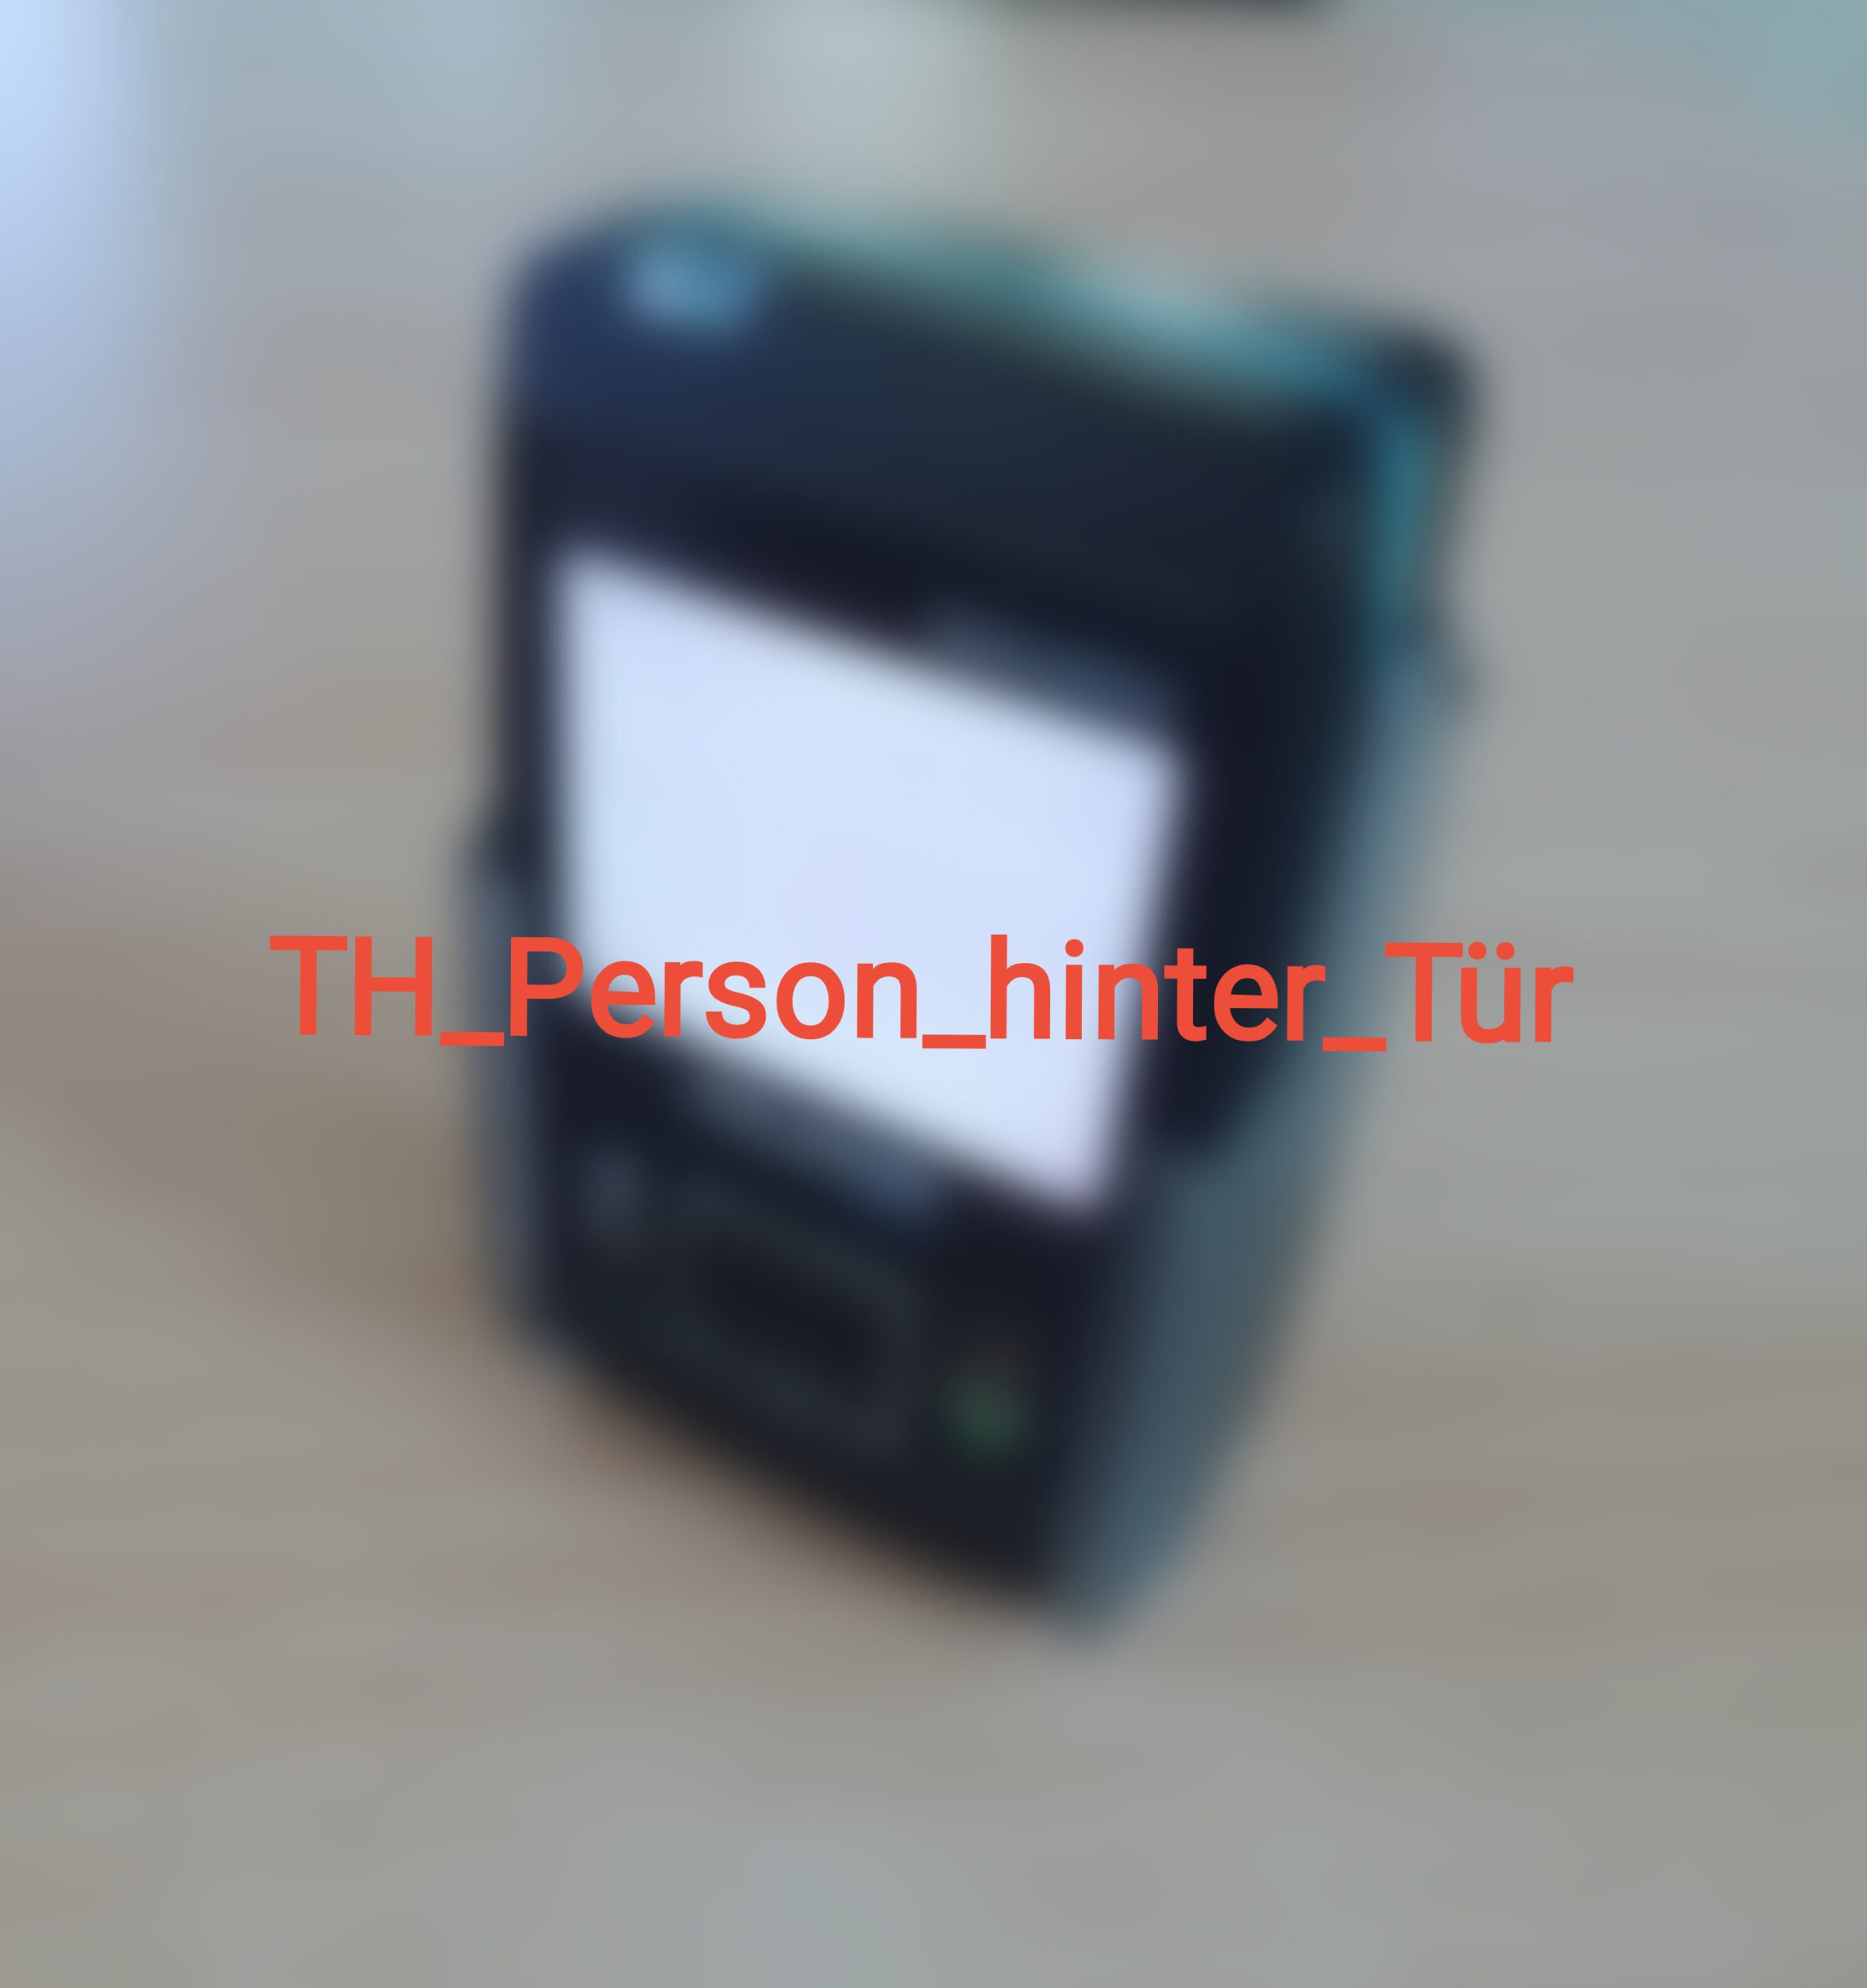 You are currently viewing Technische Hilfe – Person hinter Tür